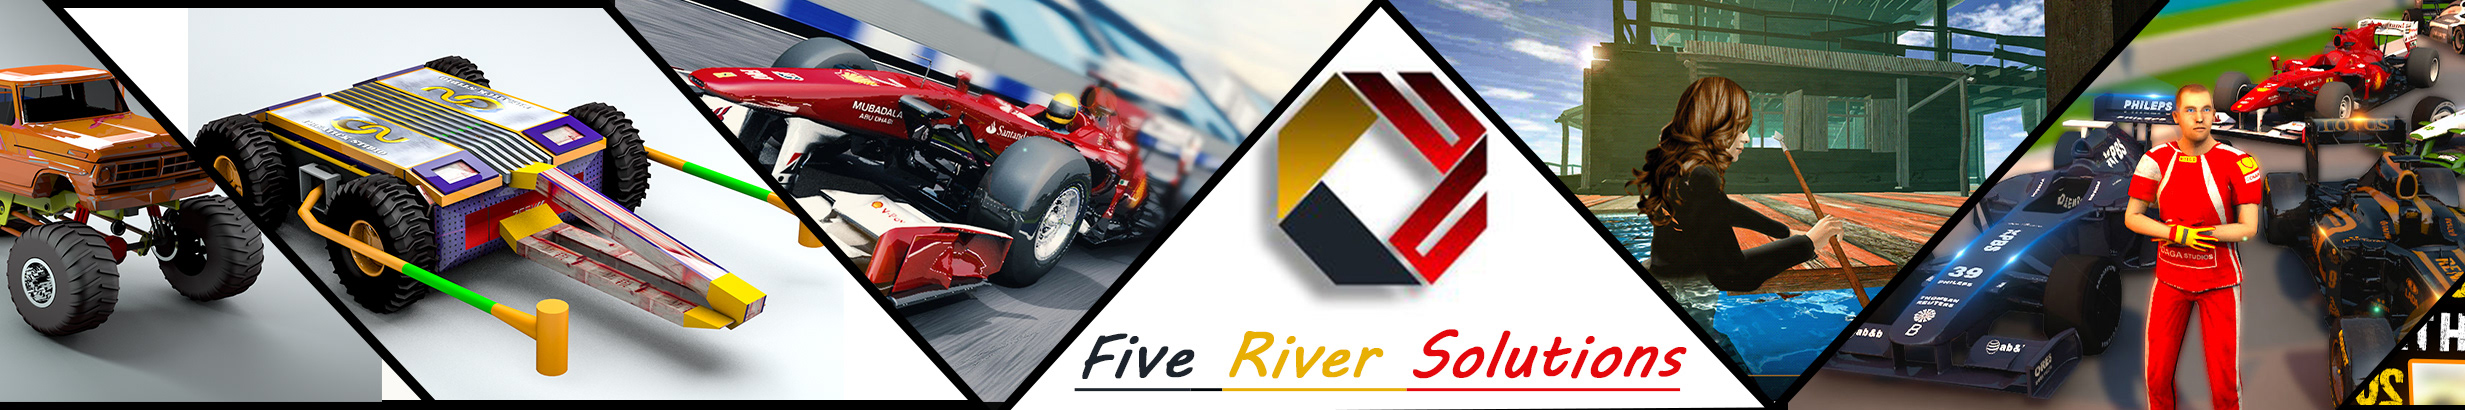 FRS (Five River Solutions)s profilbanner